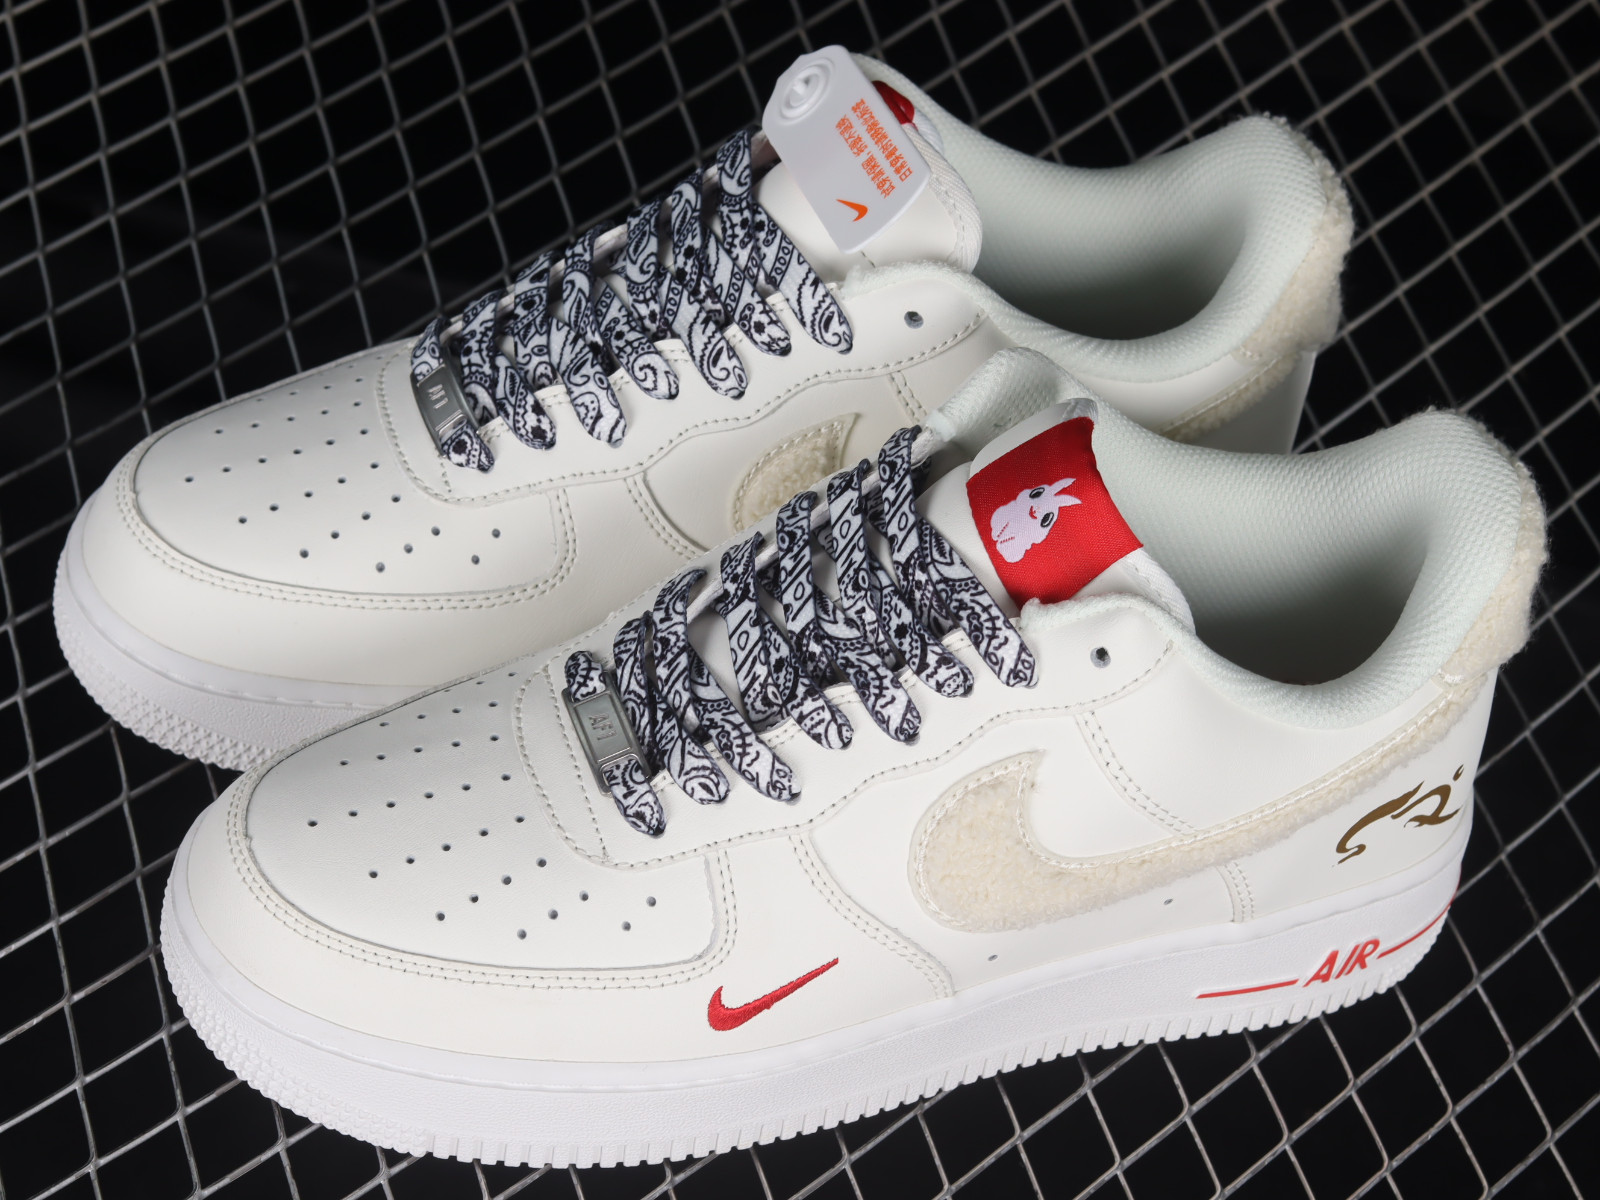 accessoires Permanent eindpunt Nike Air Force 1 07 Low White Grey Red Gold BS9055 - GmarShops - 815 - nike  lebron first copy back to college student